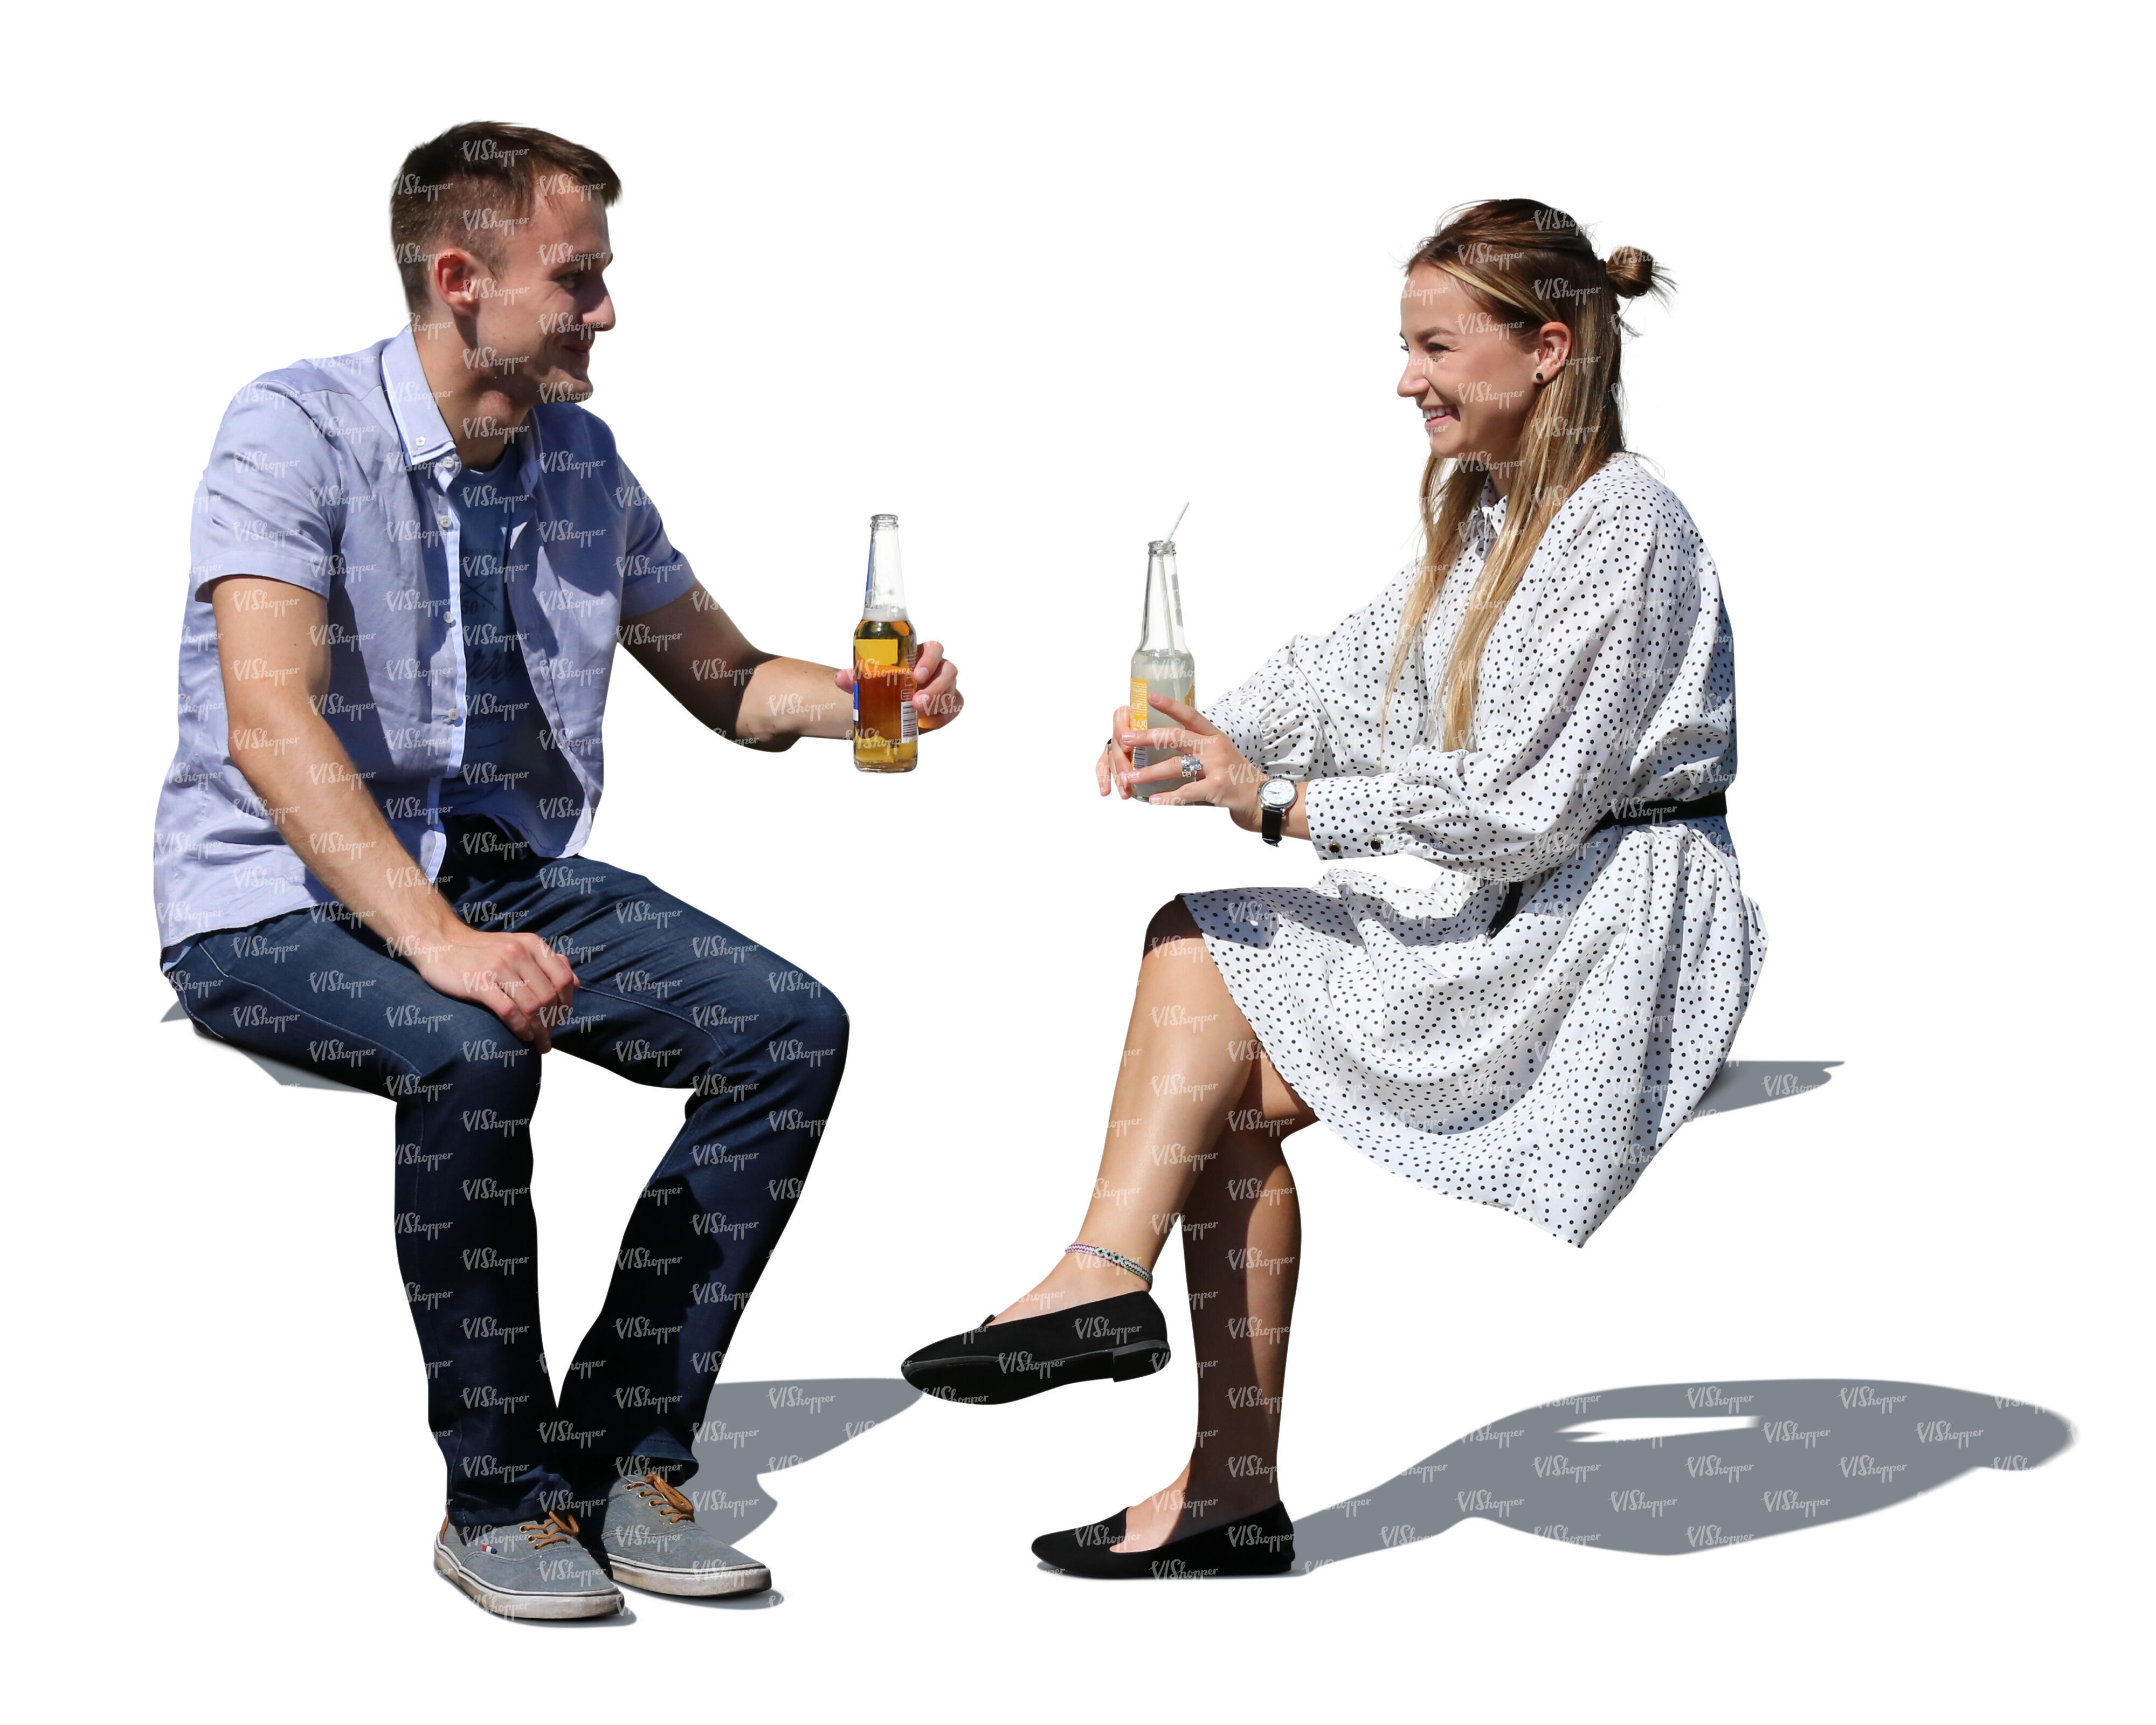 cut out man and woman sitting and drinking refreshing drinks - VIShopper